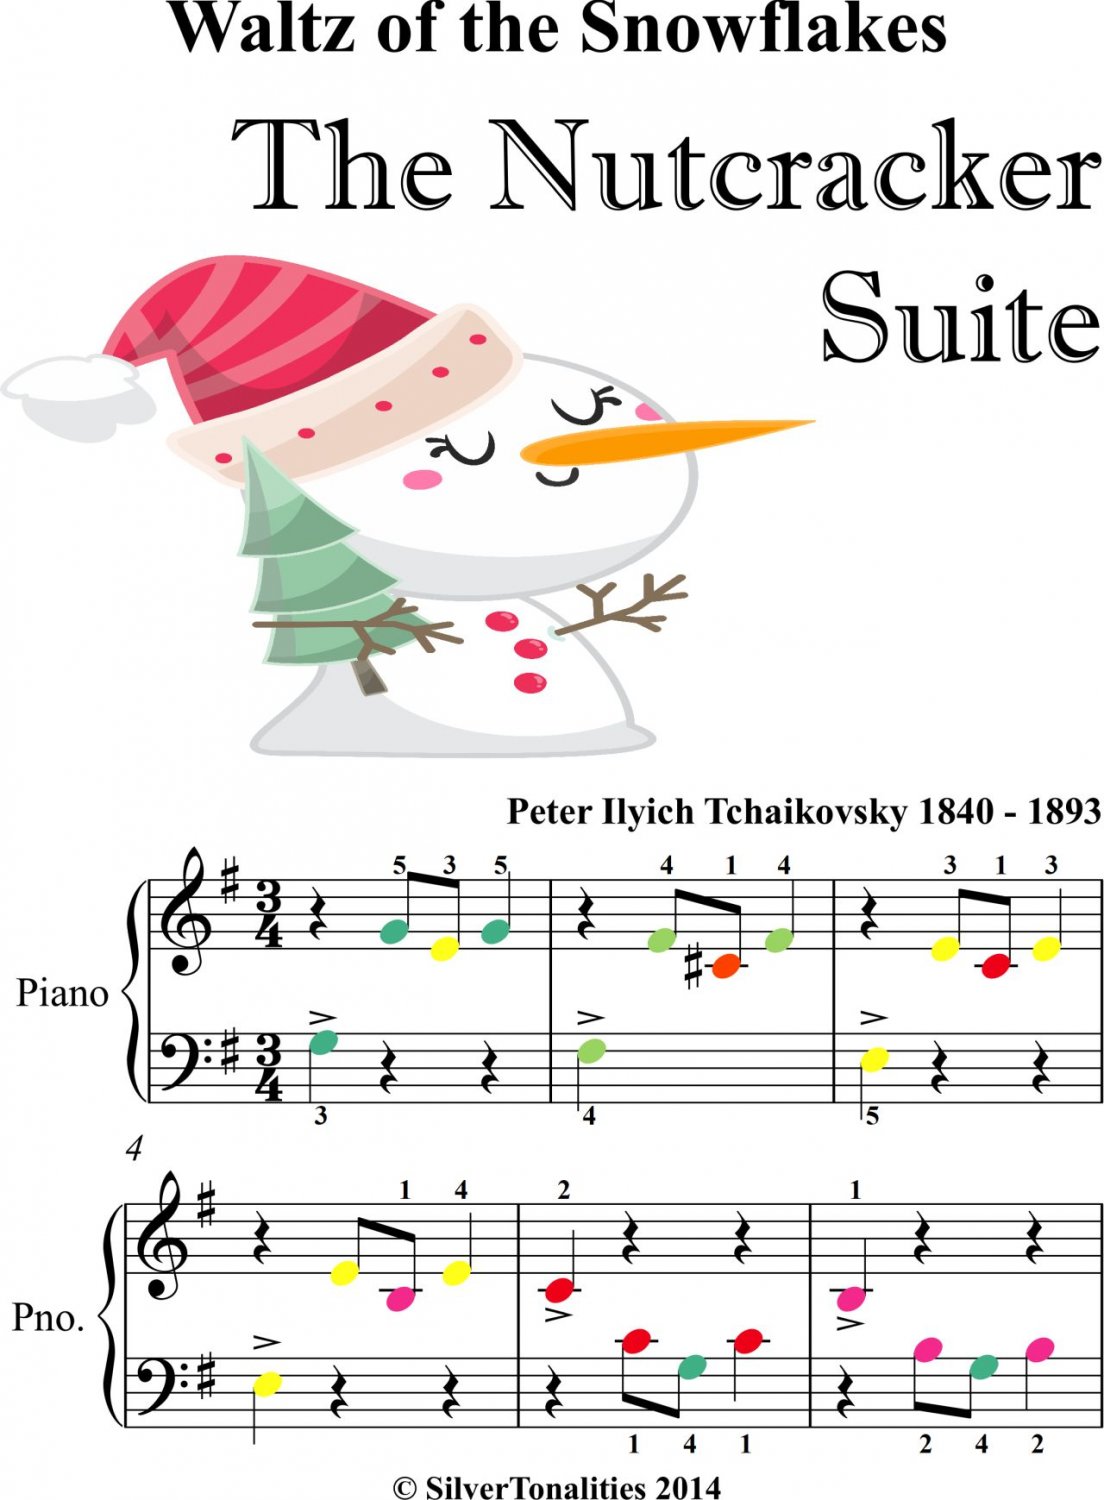 Waltz of the Snowflakes Nutcracker Suite Beginner Piano Sheet Music with Colored Notes